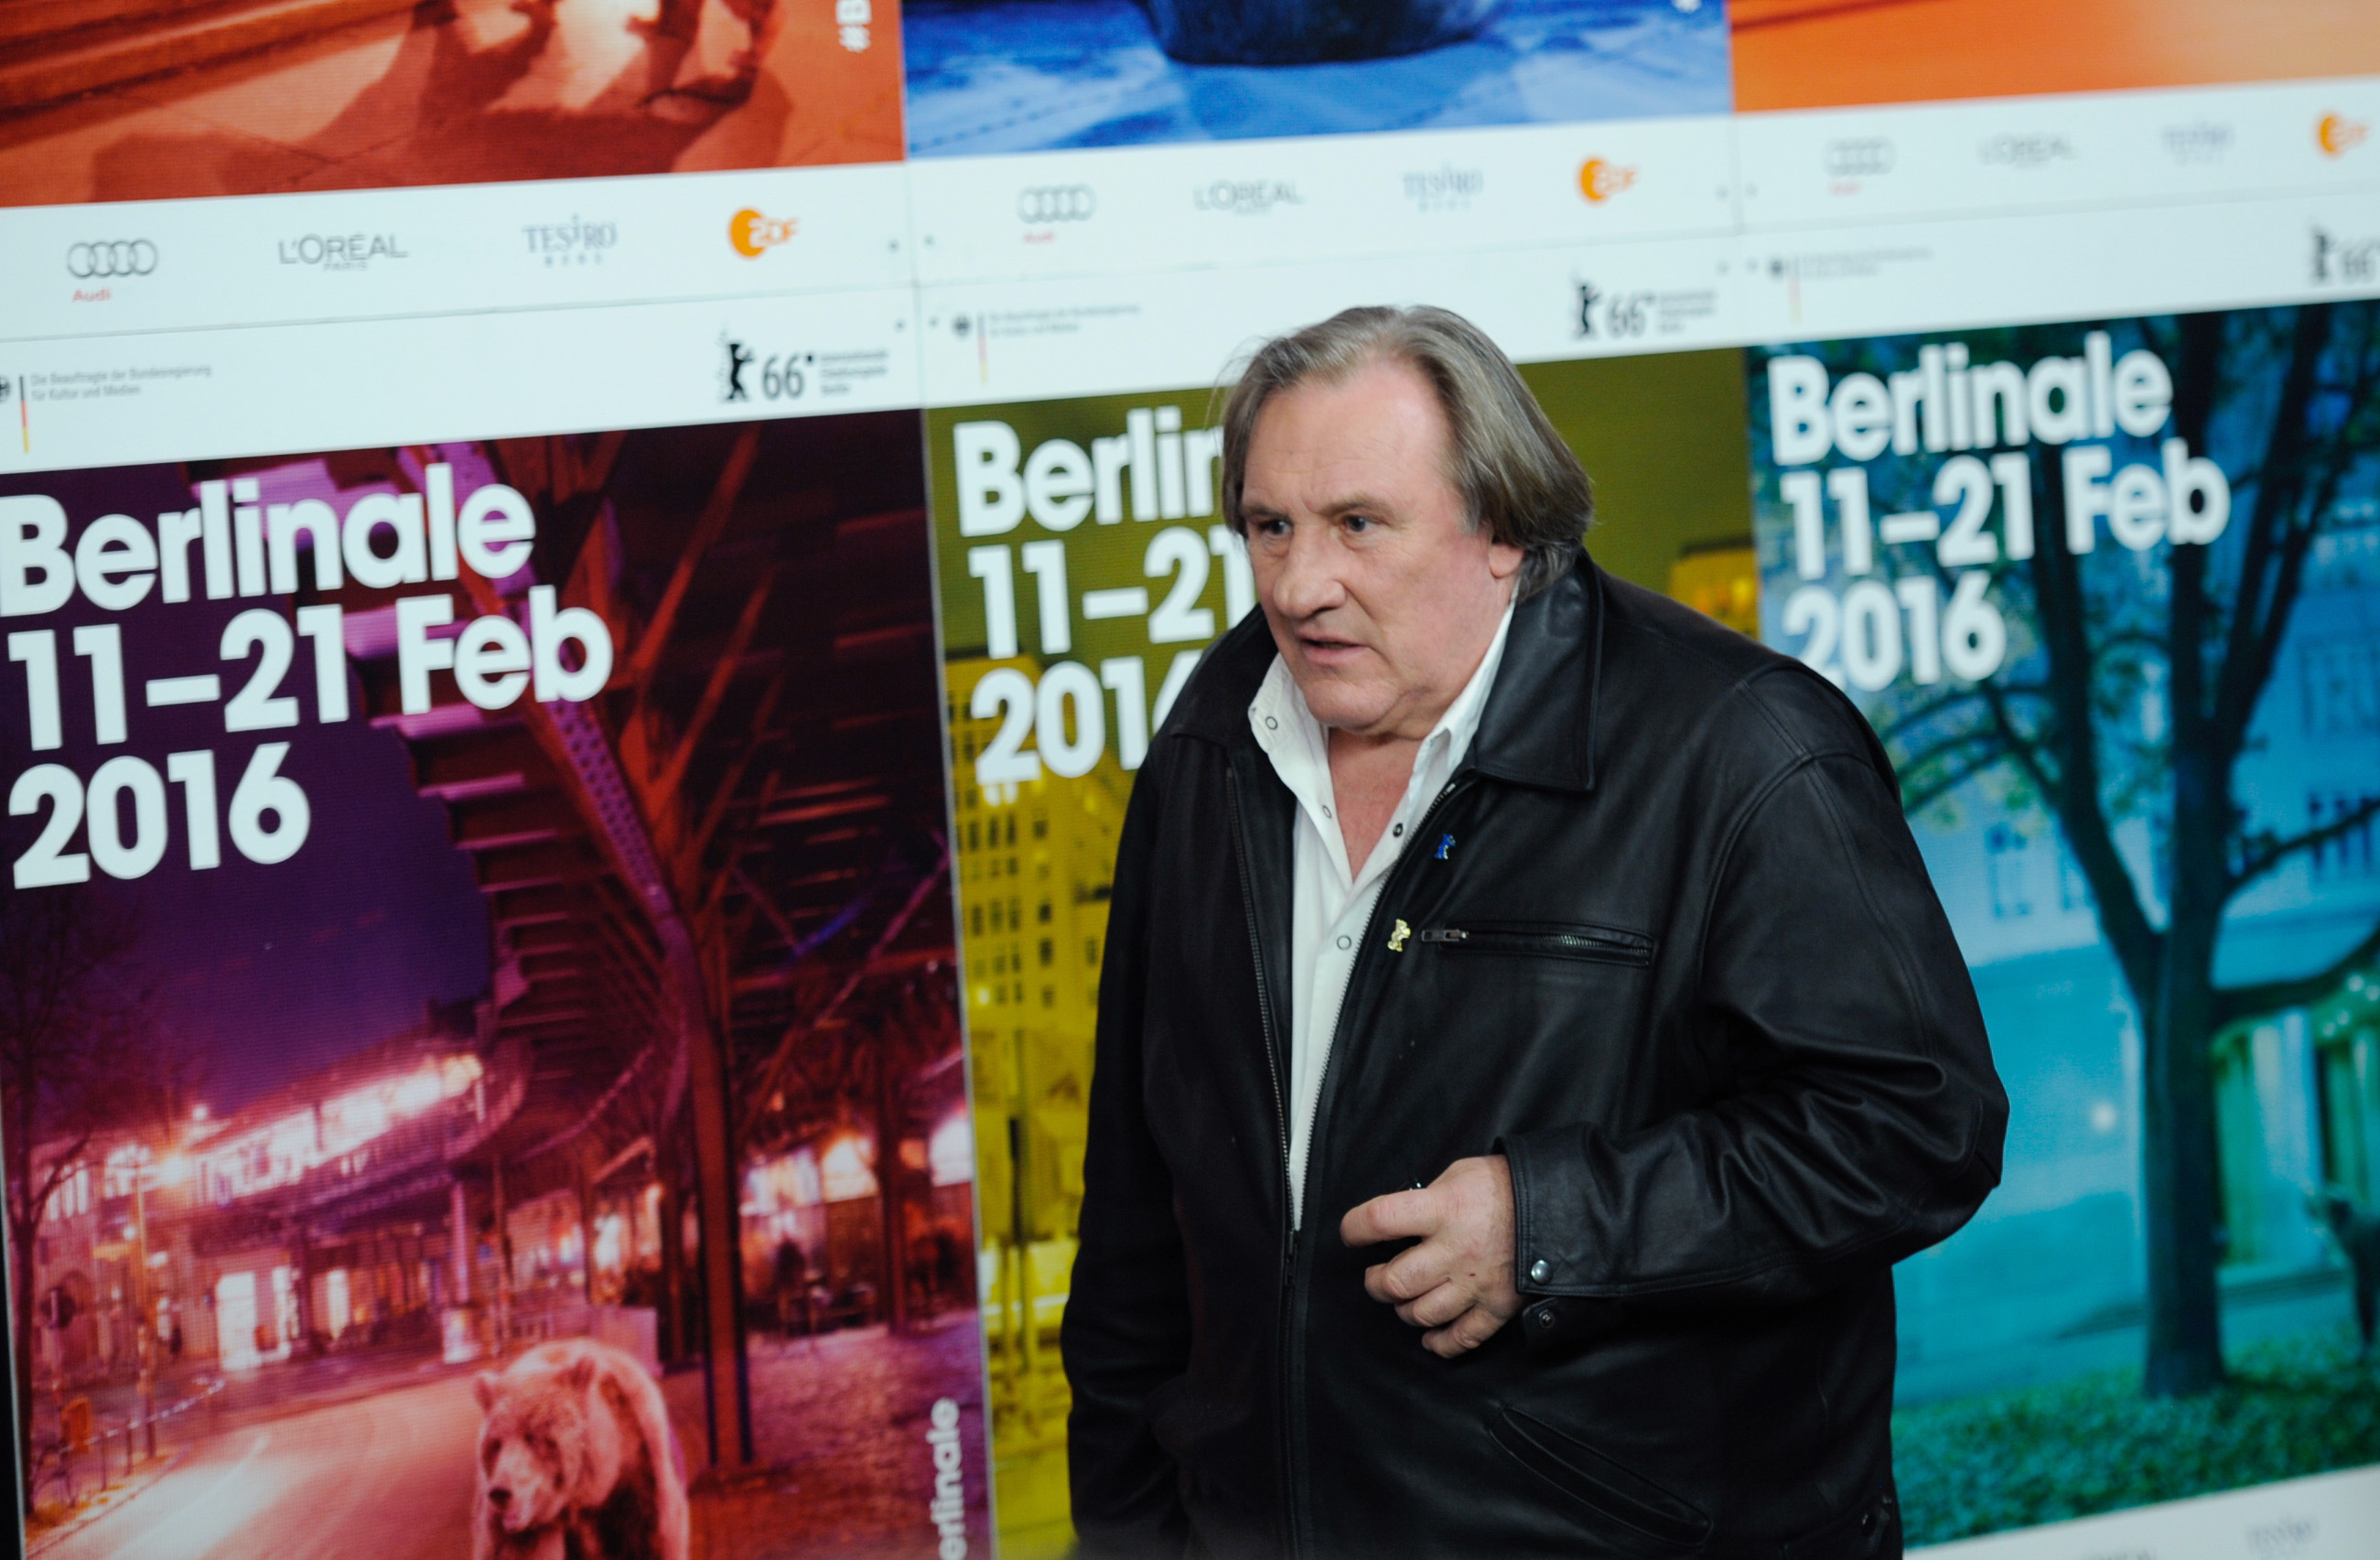 Actor Depardieu arrives for news conference at 66th Berlinale International Film Festival in Berlin